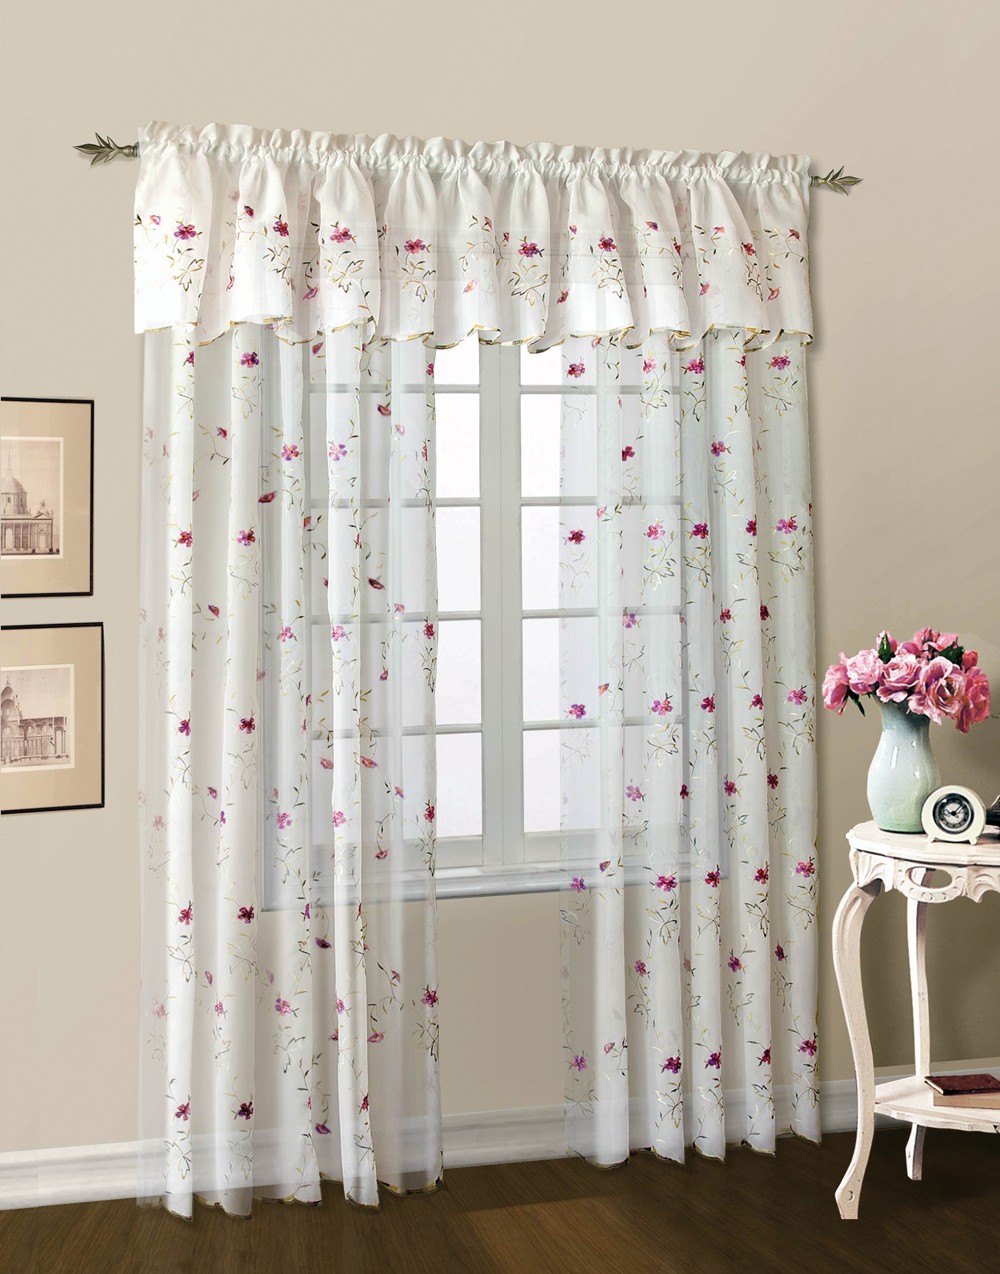 Sheer Embroidered Curtains in Curtain